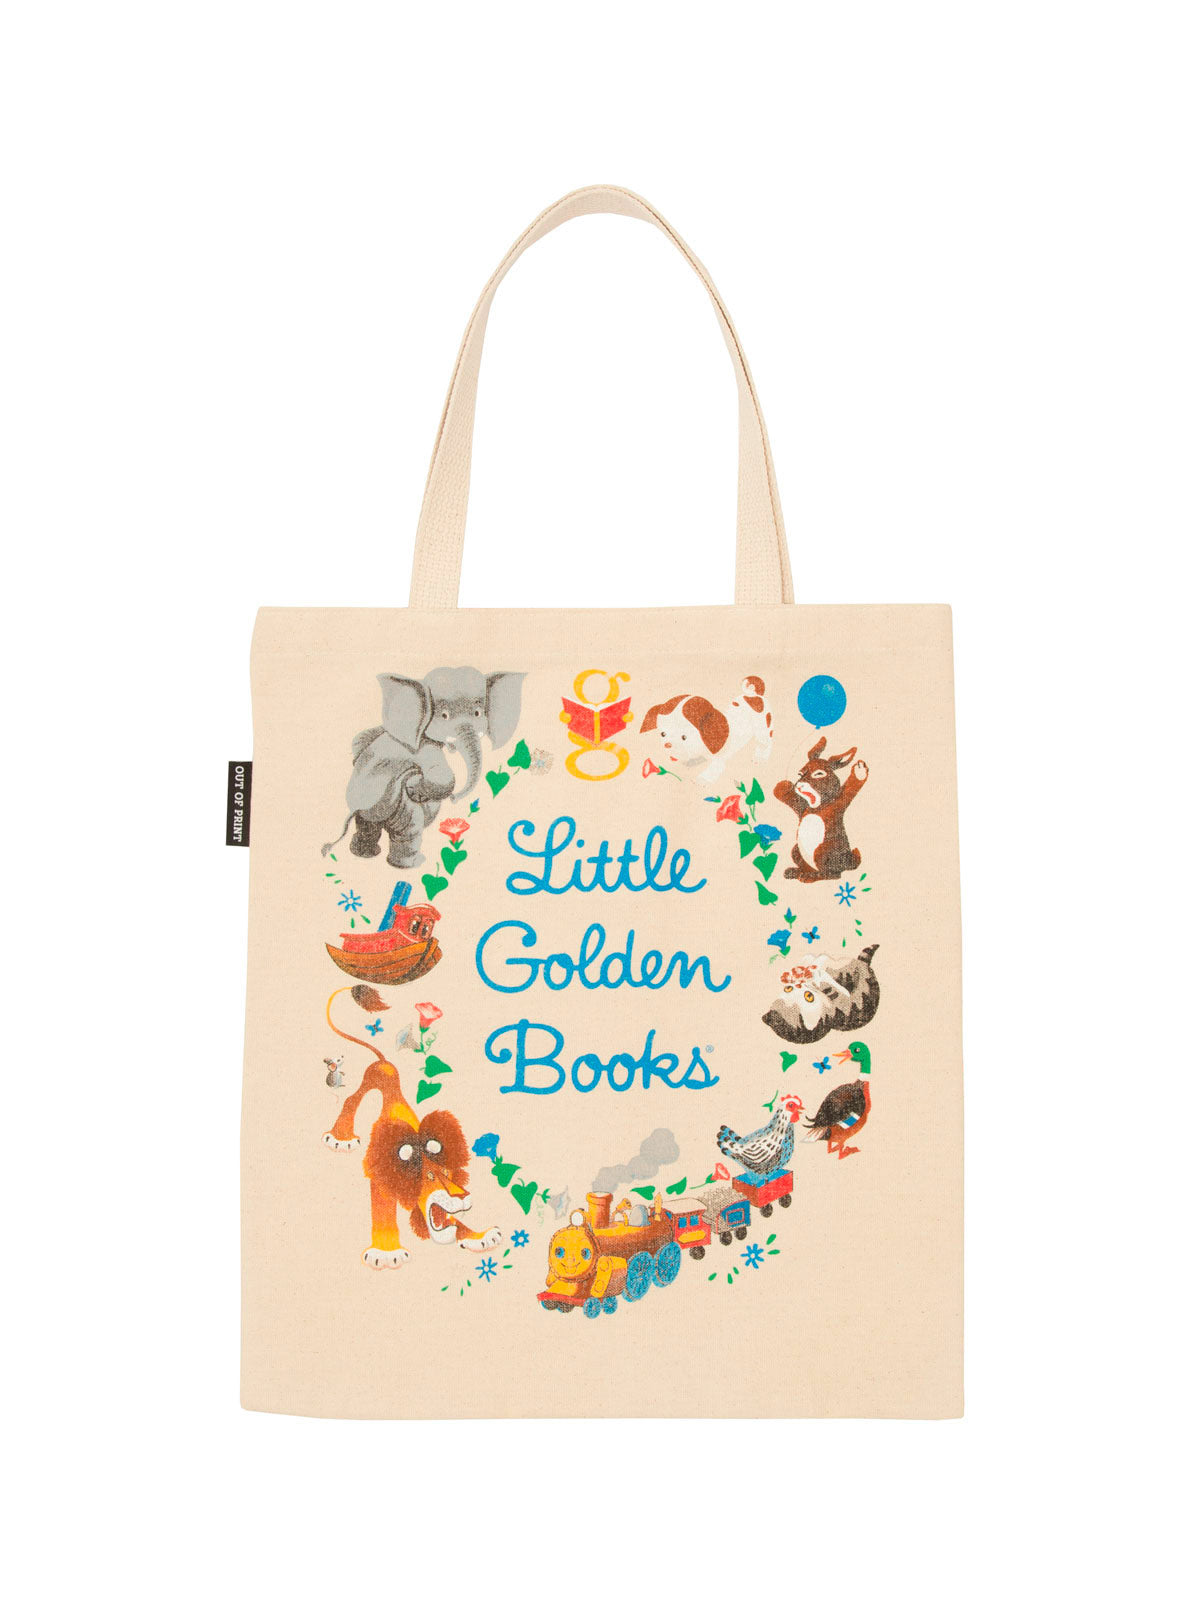 A Little Bit of Spice Tote Bag – Little District Books